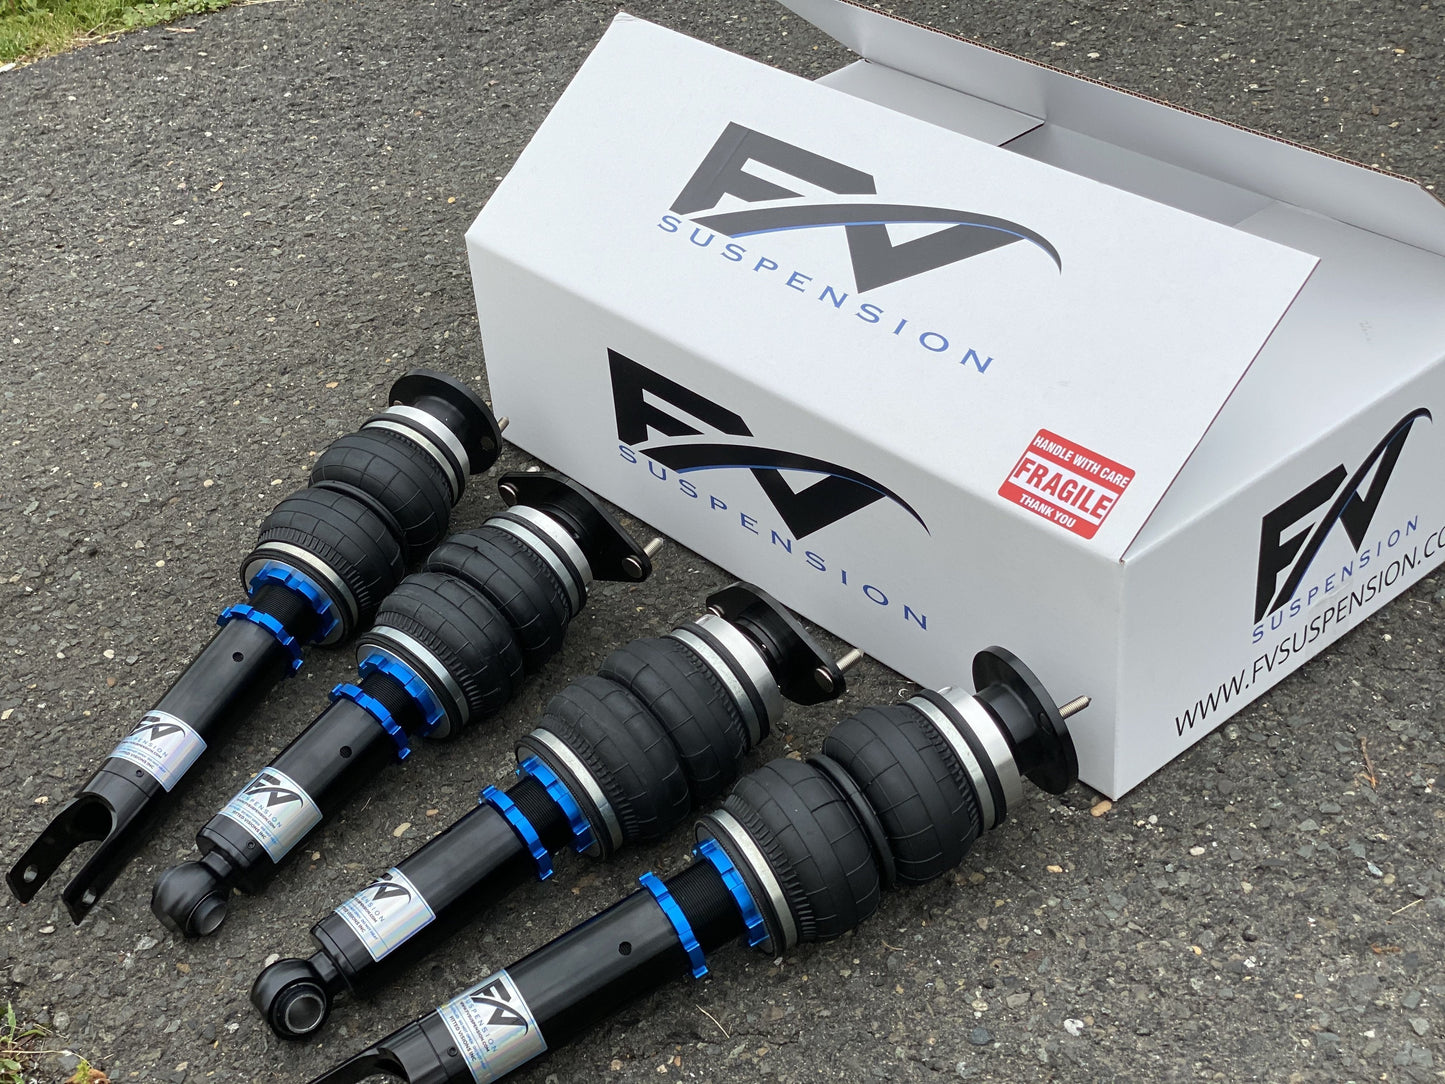 FV Suspension Tier 1 Budget kit Complete Air Ride kit for 06-11 Mercedes-Benz CLS-Class W219 - Full Kit